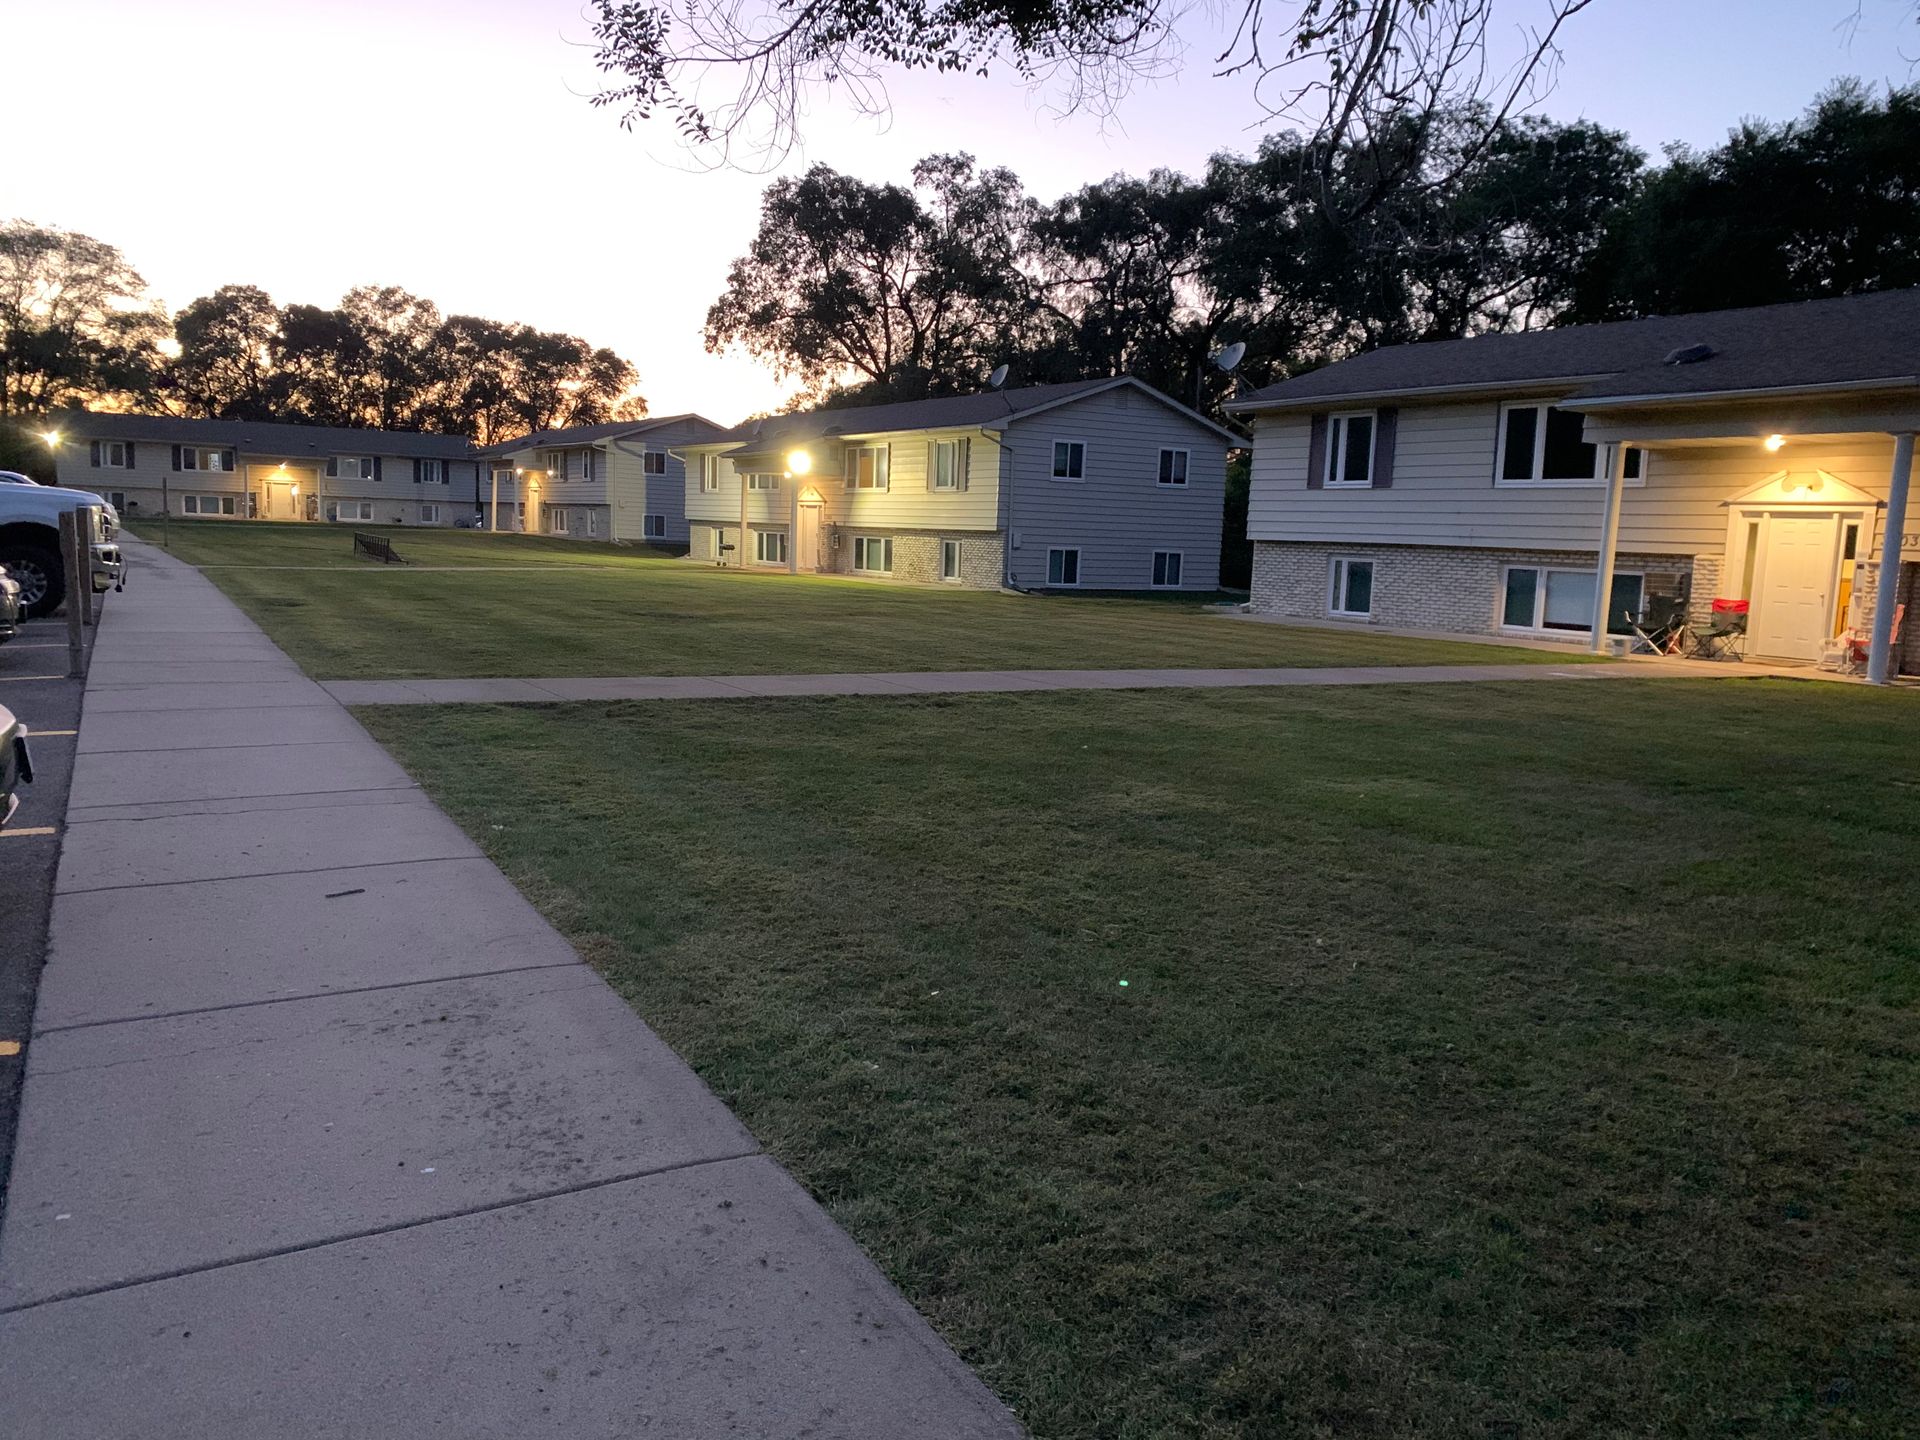 A row of houses are lined up next to each other